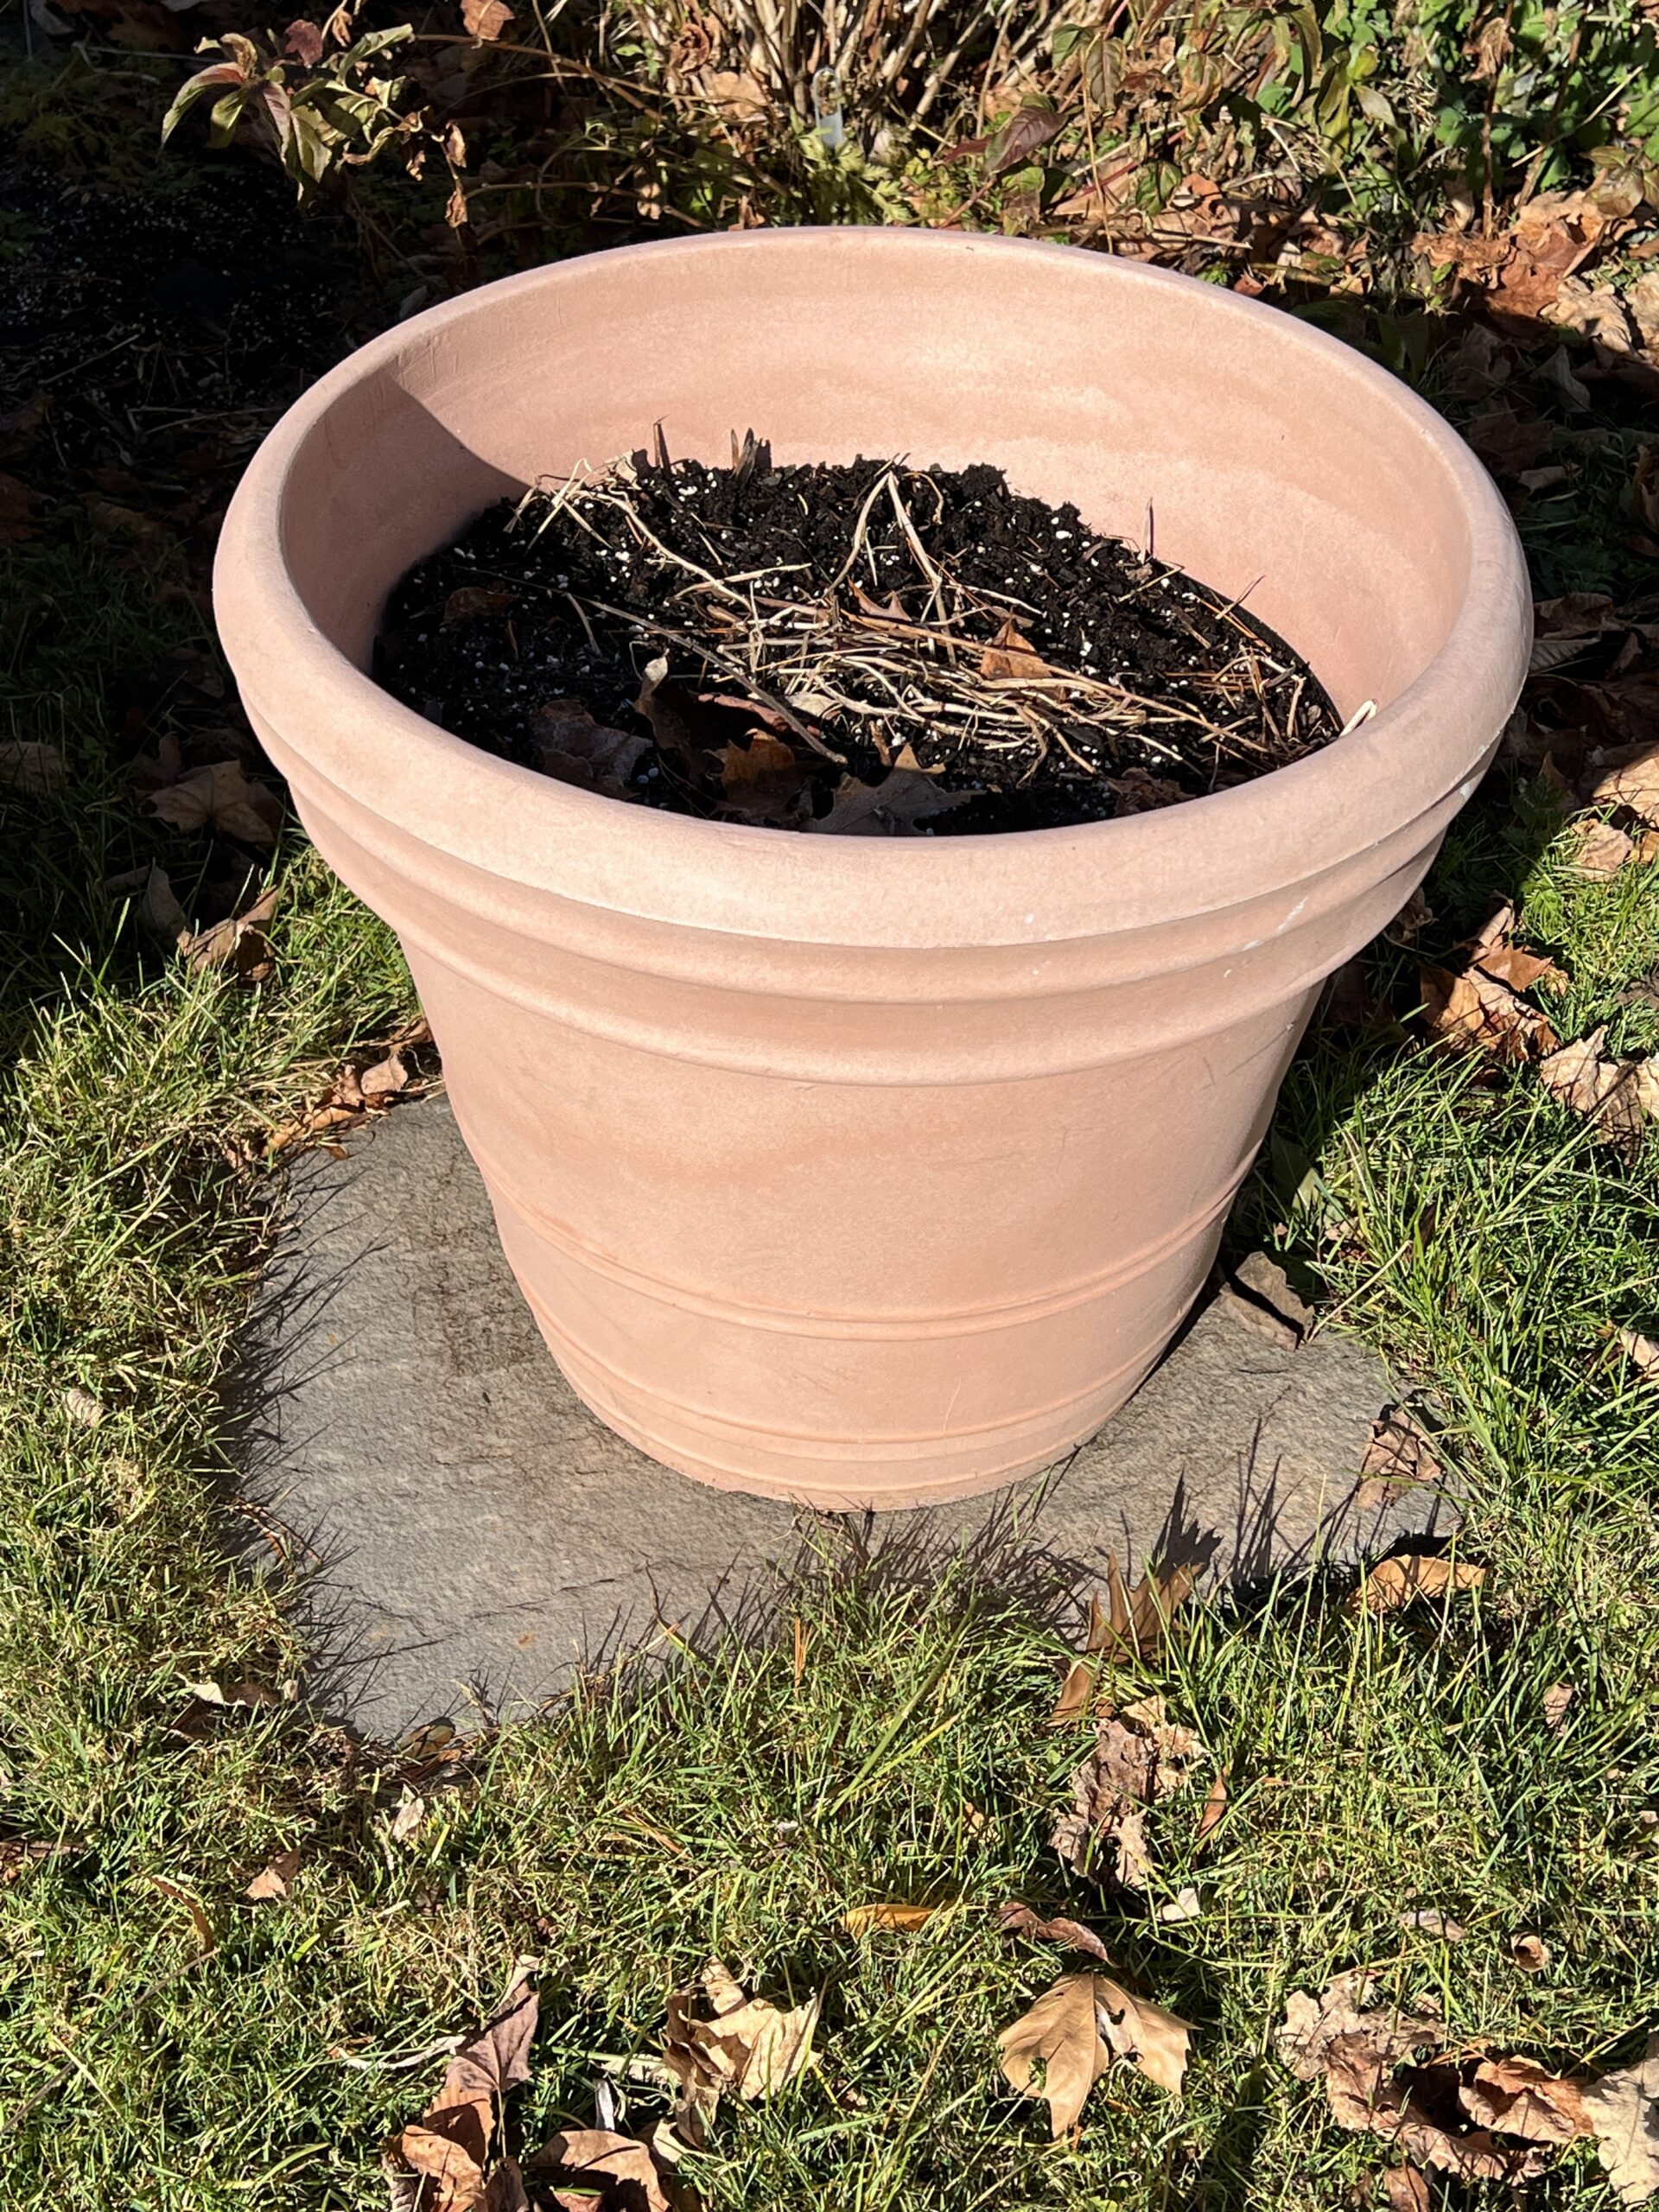 Terra cotta (any clay or cement) pots need to be emptied and stored properly to avoid winter cracking, splitting and chipping. This faux terra cotta pot made from an extruded foam product is winter hardy and can withstand freezing but should still be emptied before winter.
ANDREW MESSINGER